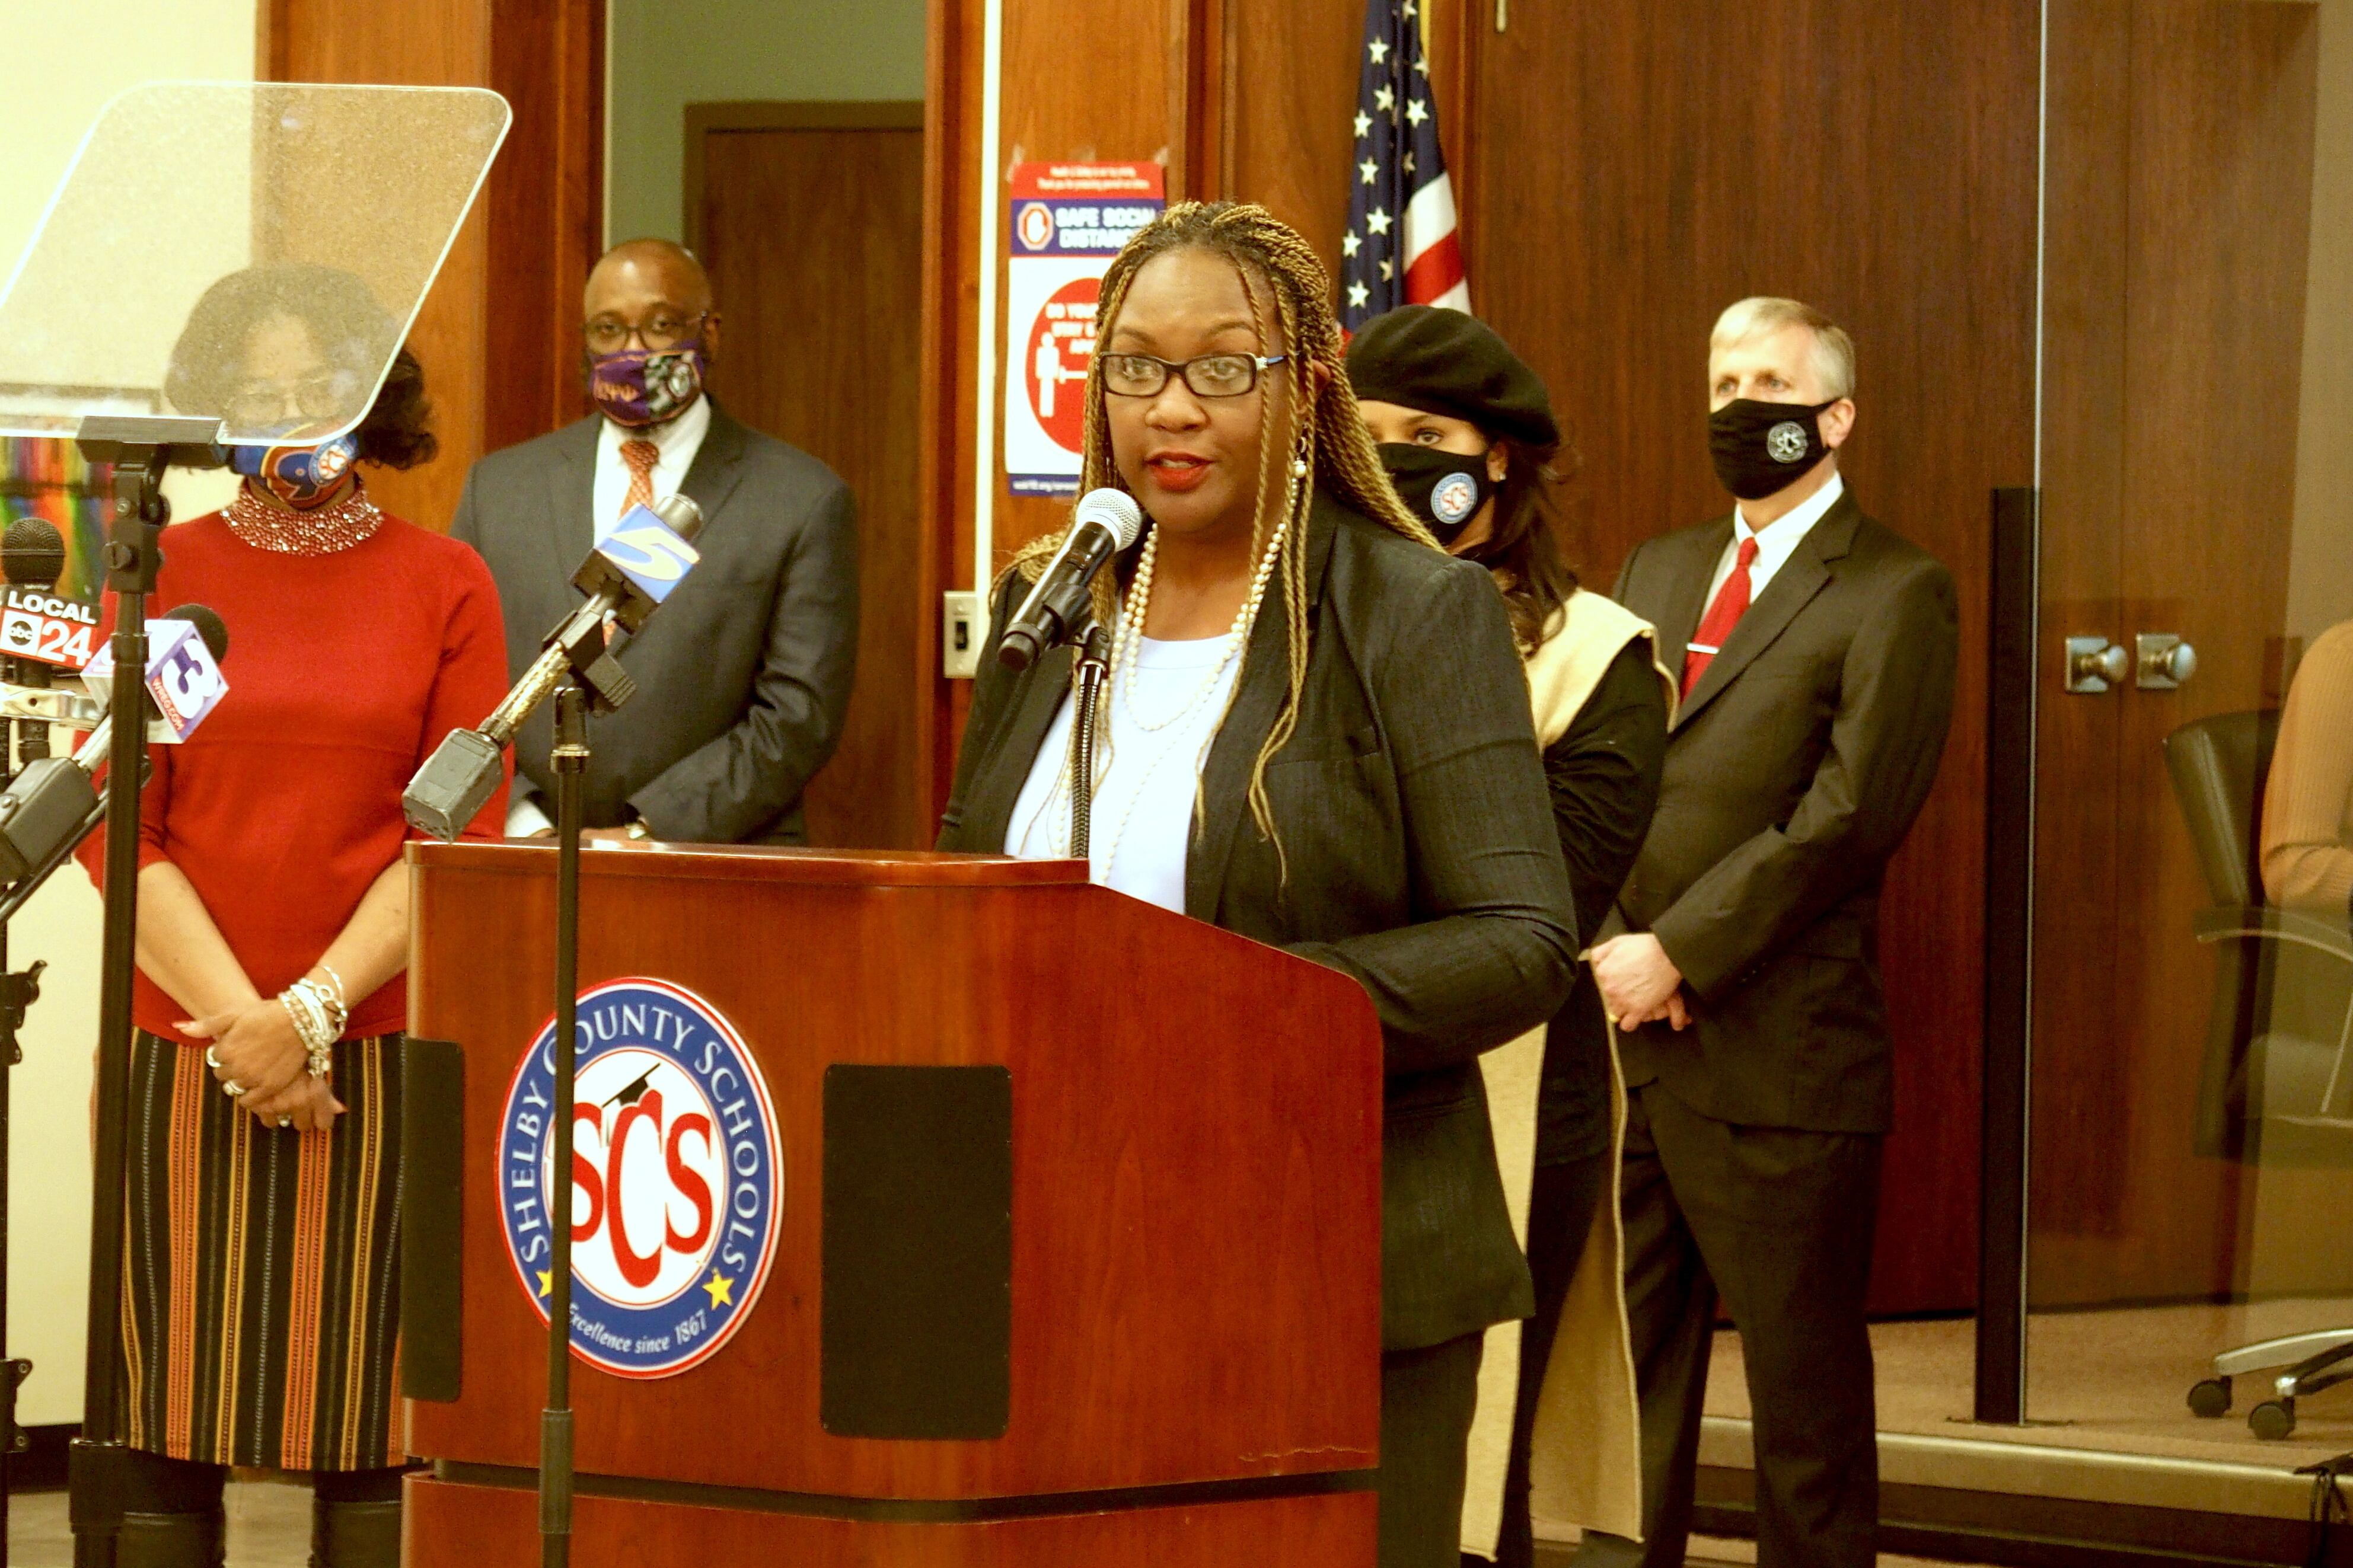 A woman wearing glasses speaks into a microphone while standing at a podium in Shelby County Schools’ central office auditorium.